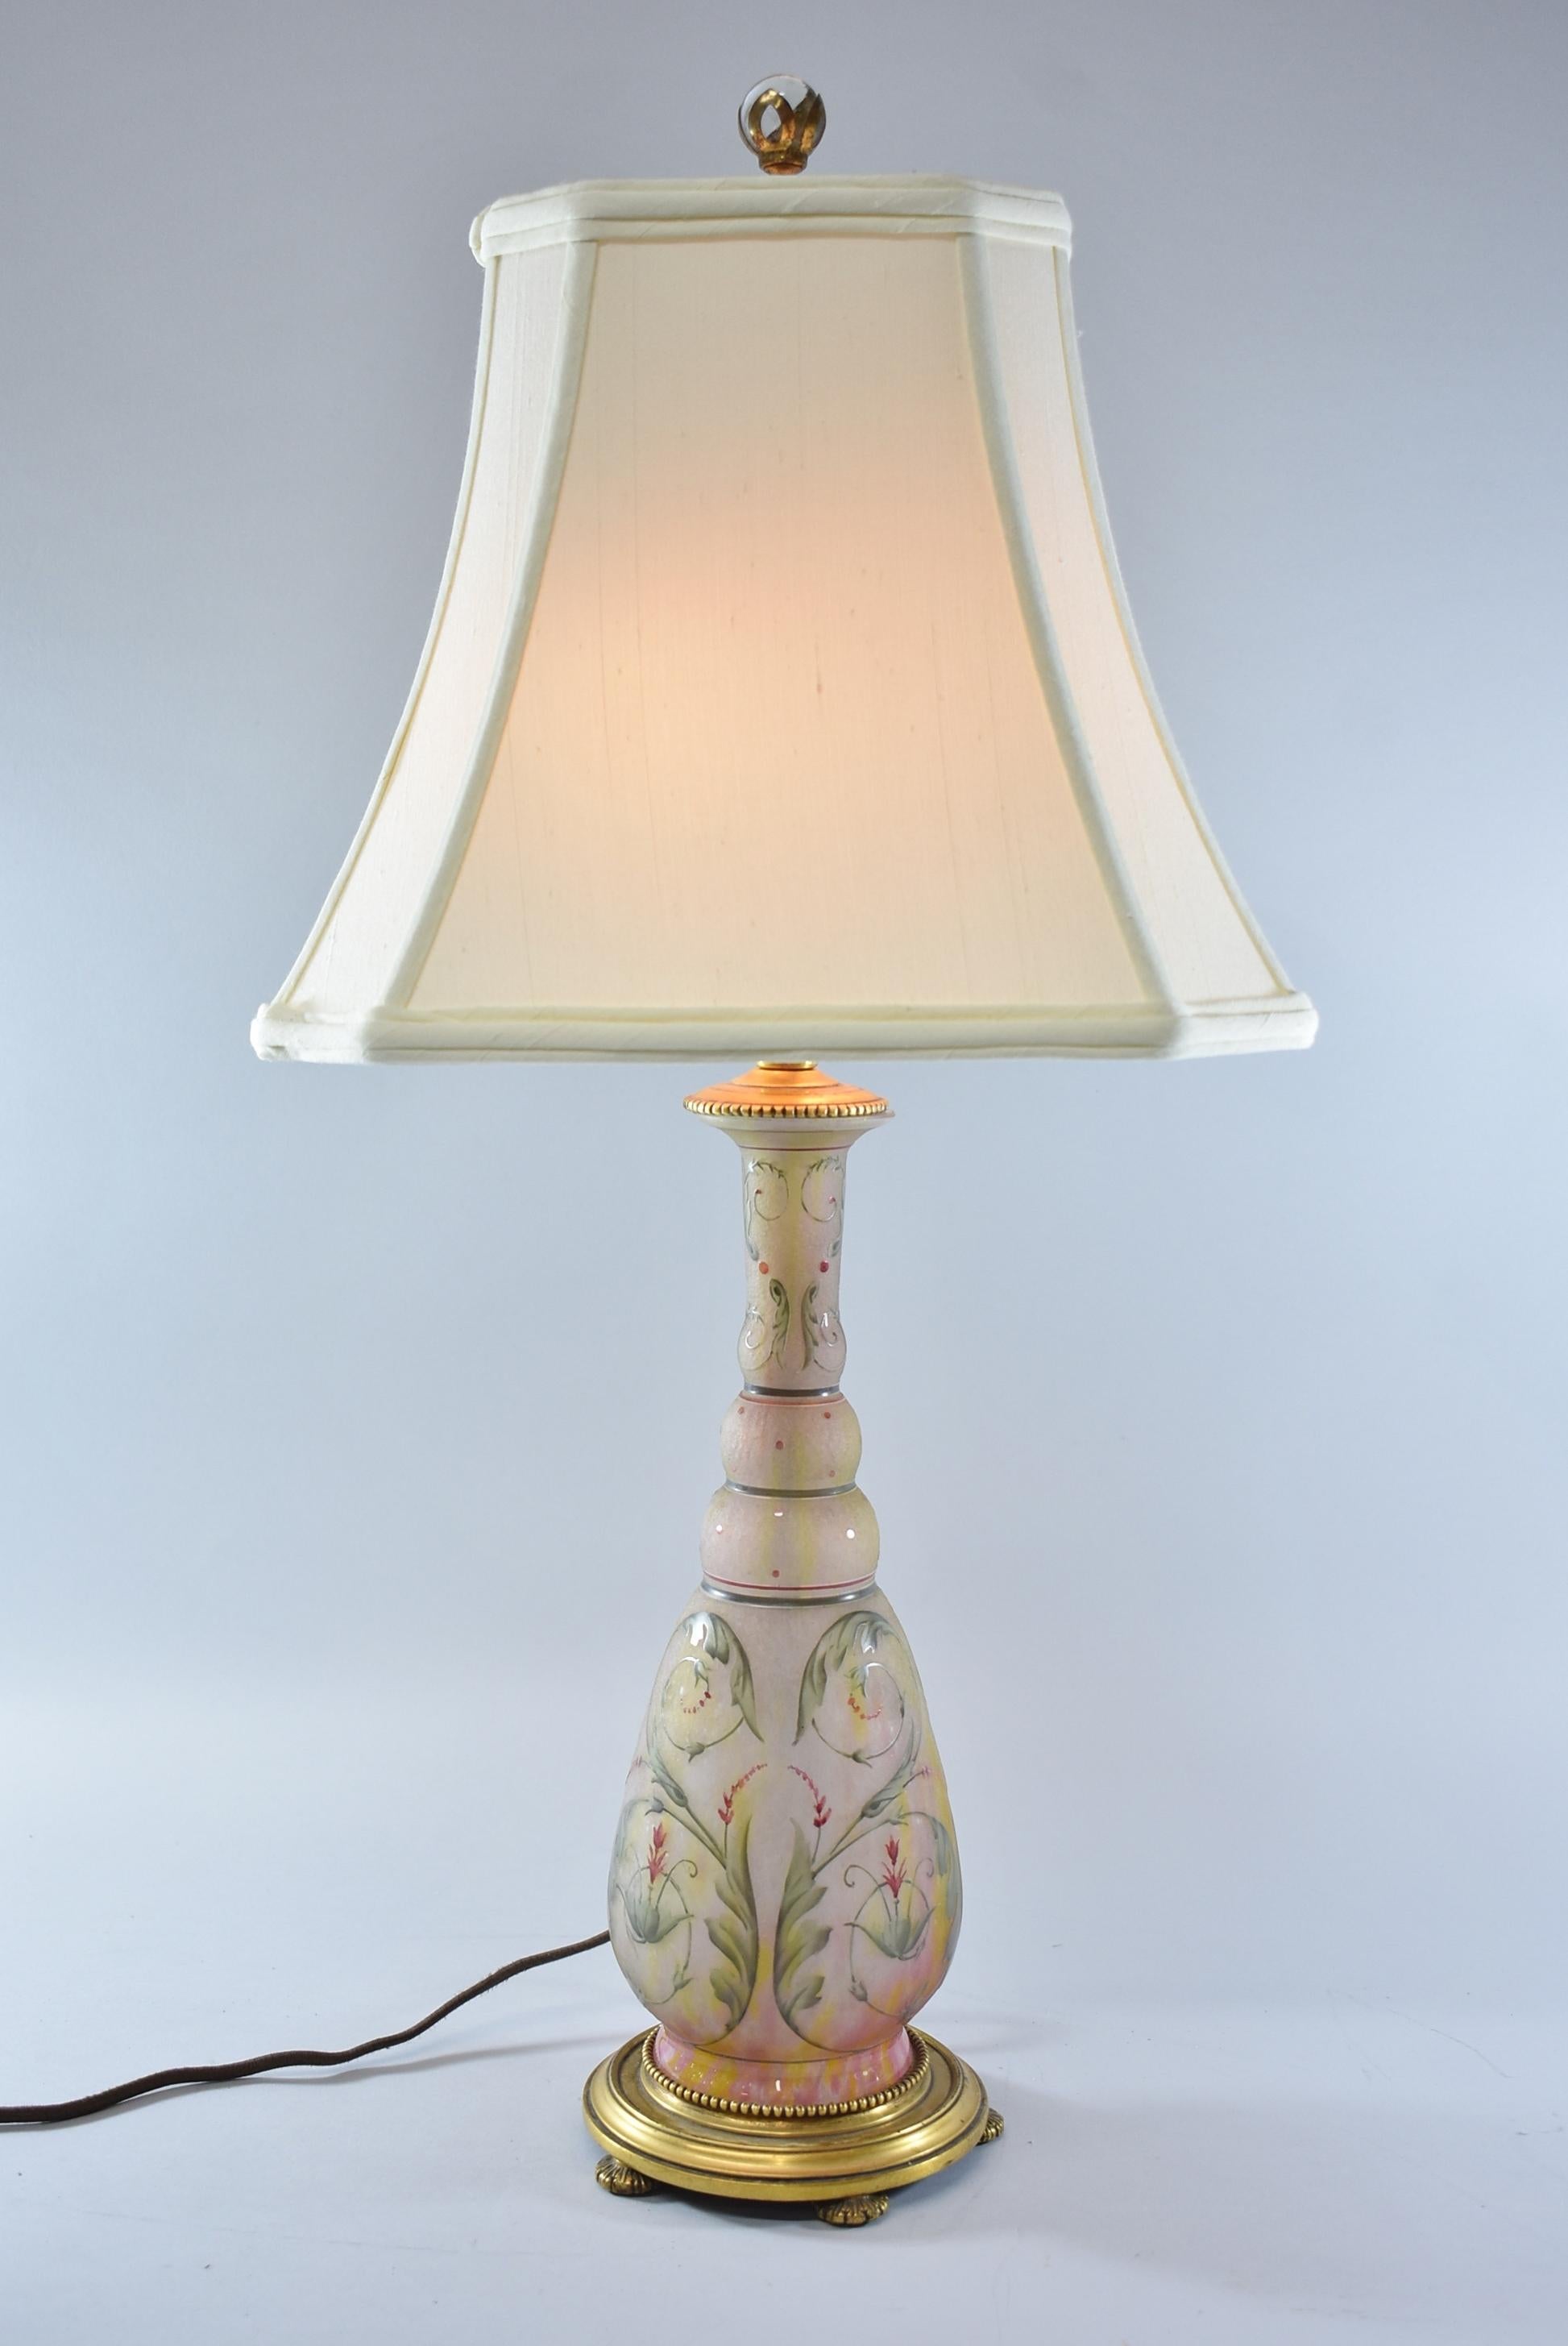 Beautiful art glass table lamp with double socket by Daum Nancy France. Acid cut and hand decorated with pink floral details and swirling leaf patterns. Brass mount base has a gold doré finish. Signed on the base.